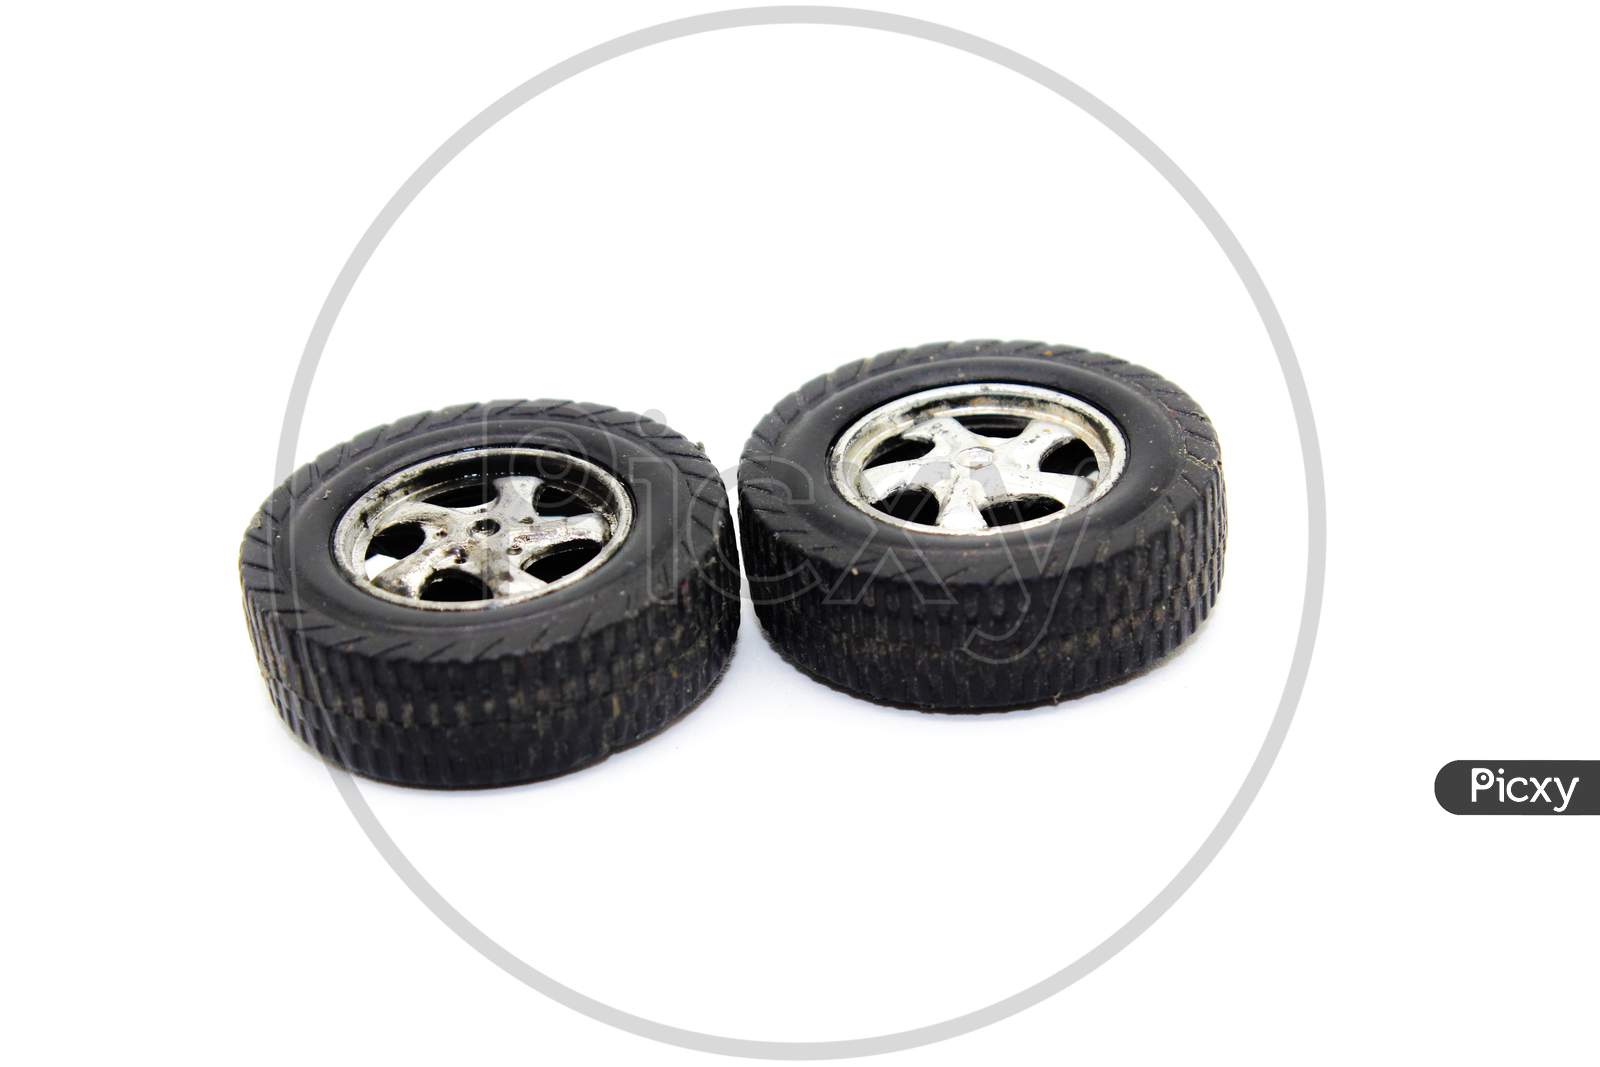 A Picture Of Car Tires With Selective Focus